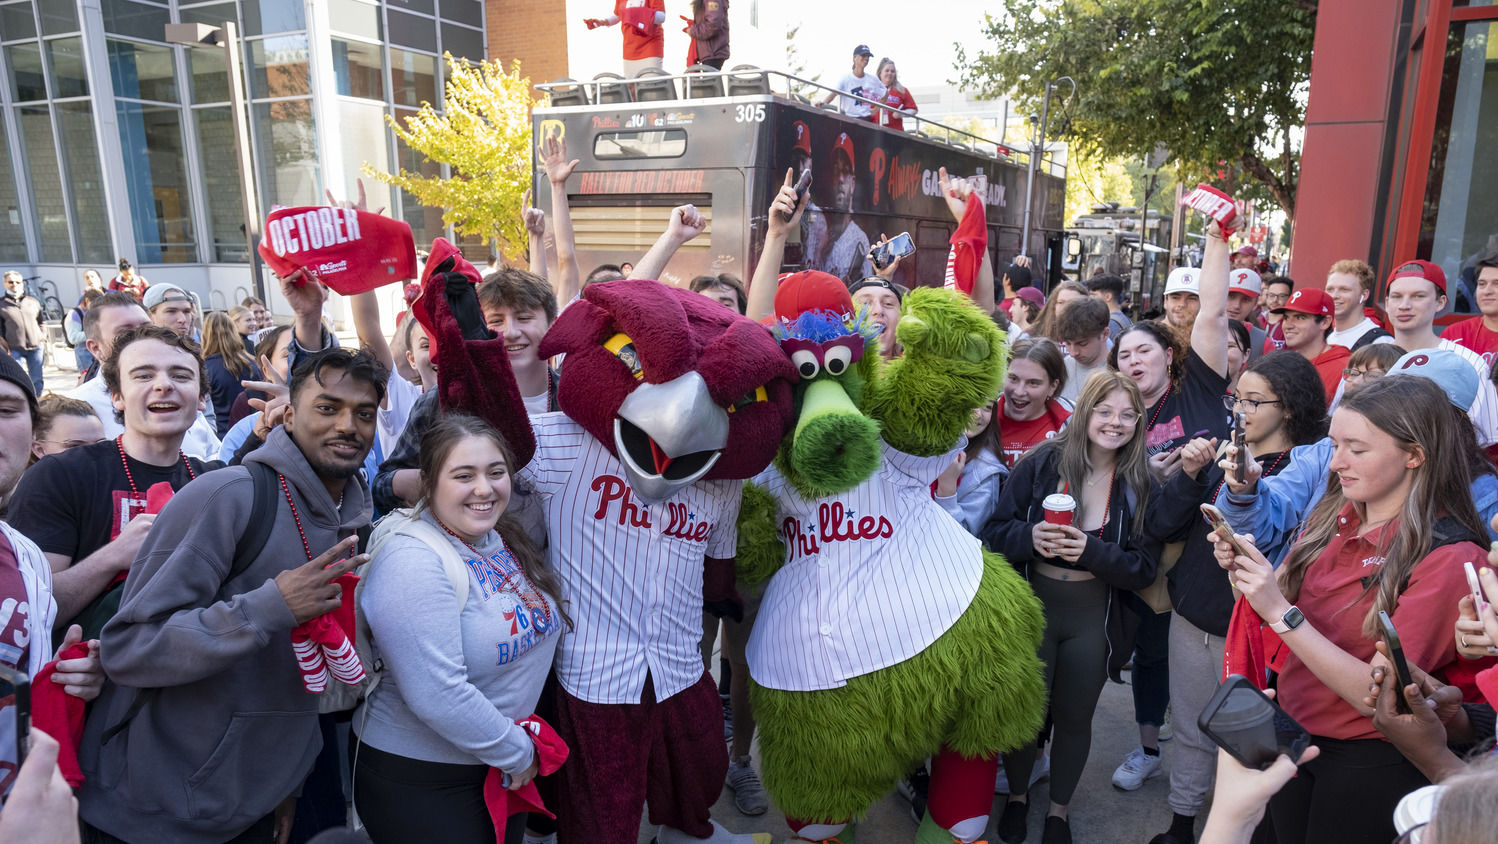 A group of smiling Temple students wearing red shirts and waving Red October towels celebrate the Philadelphia Phillies.